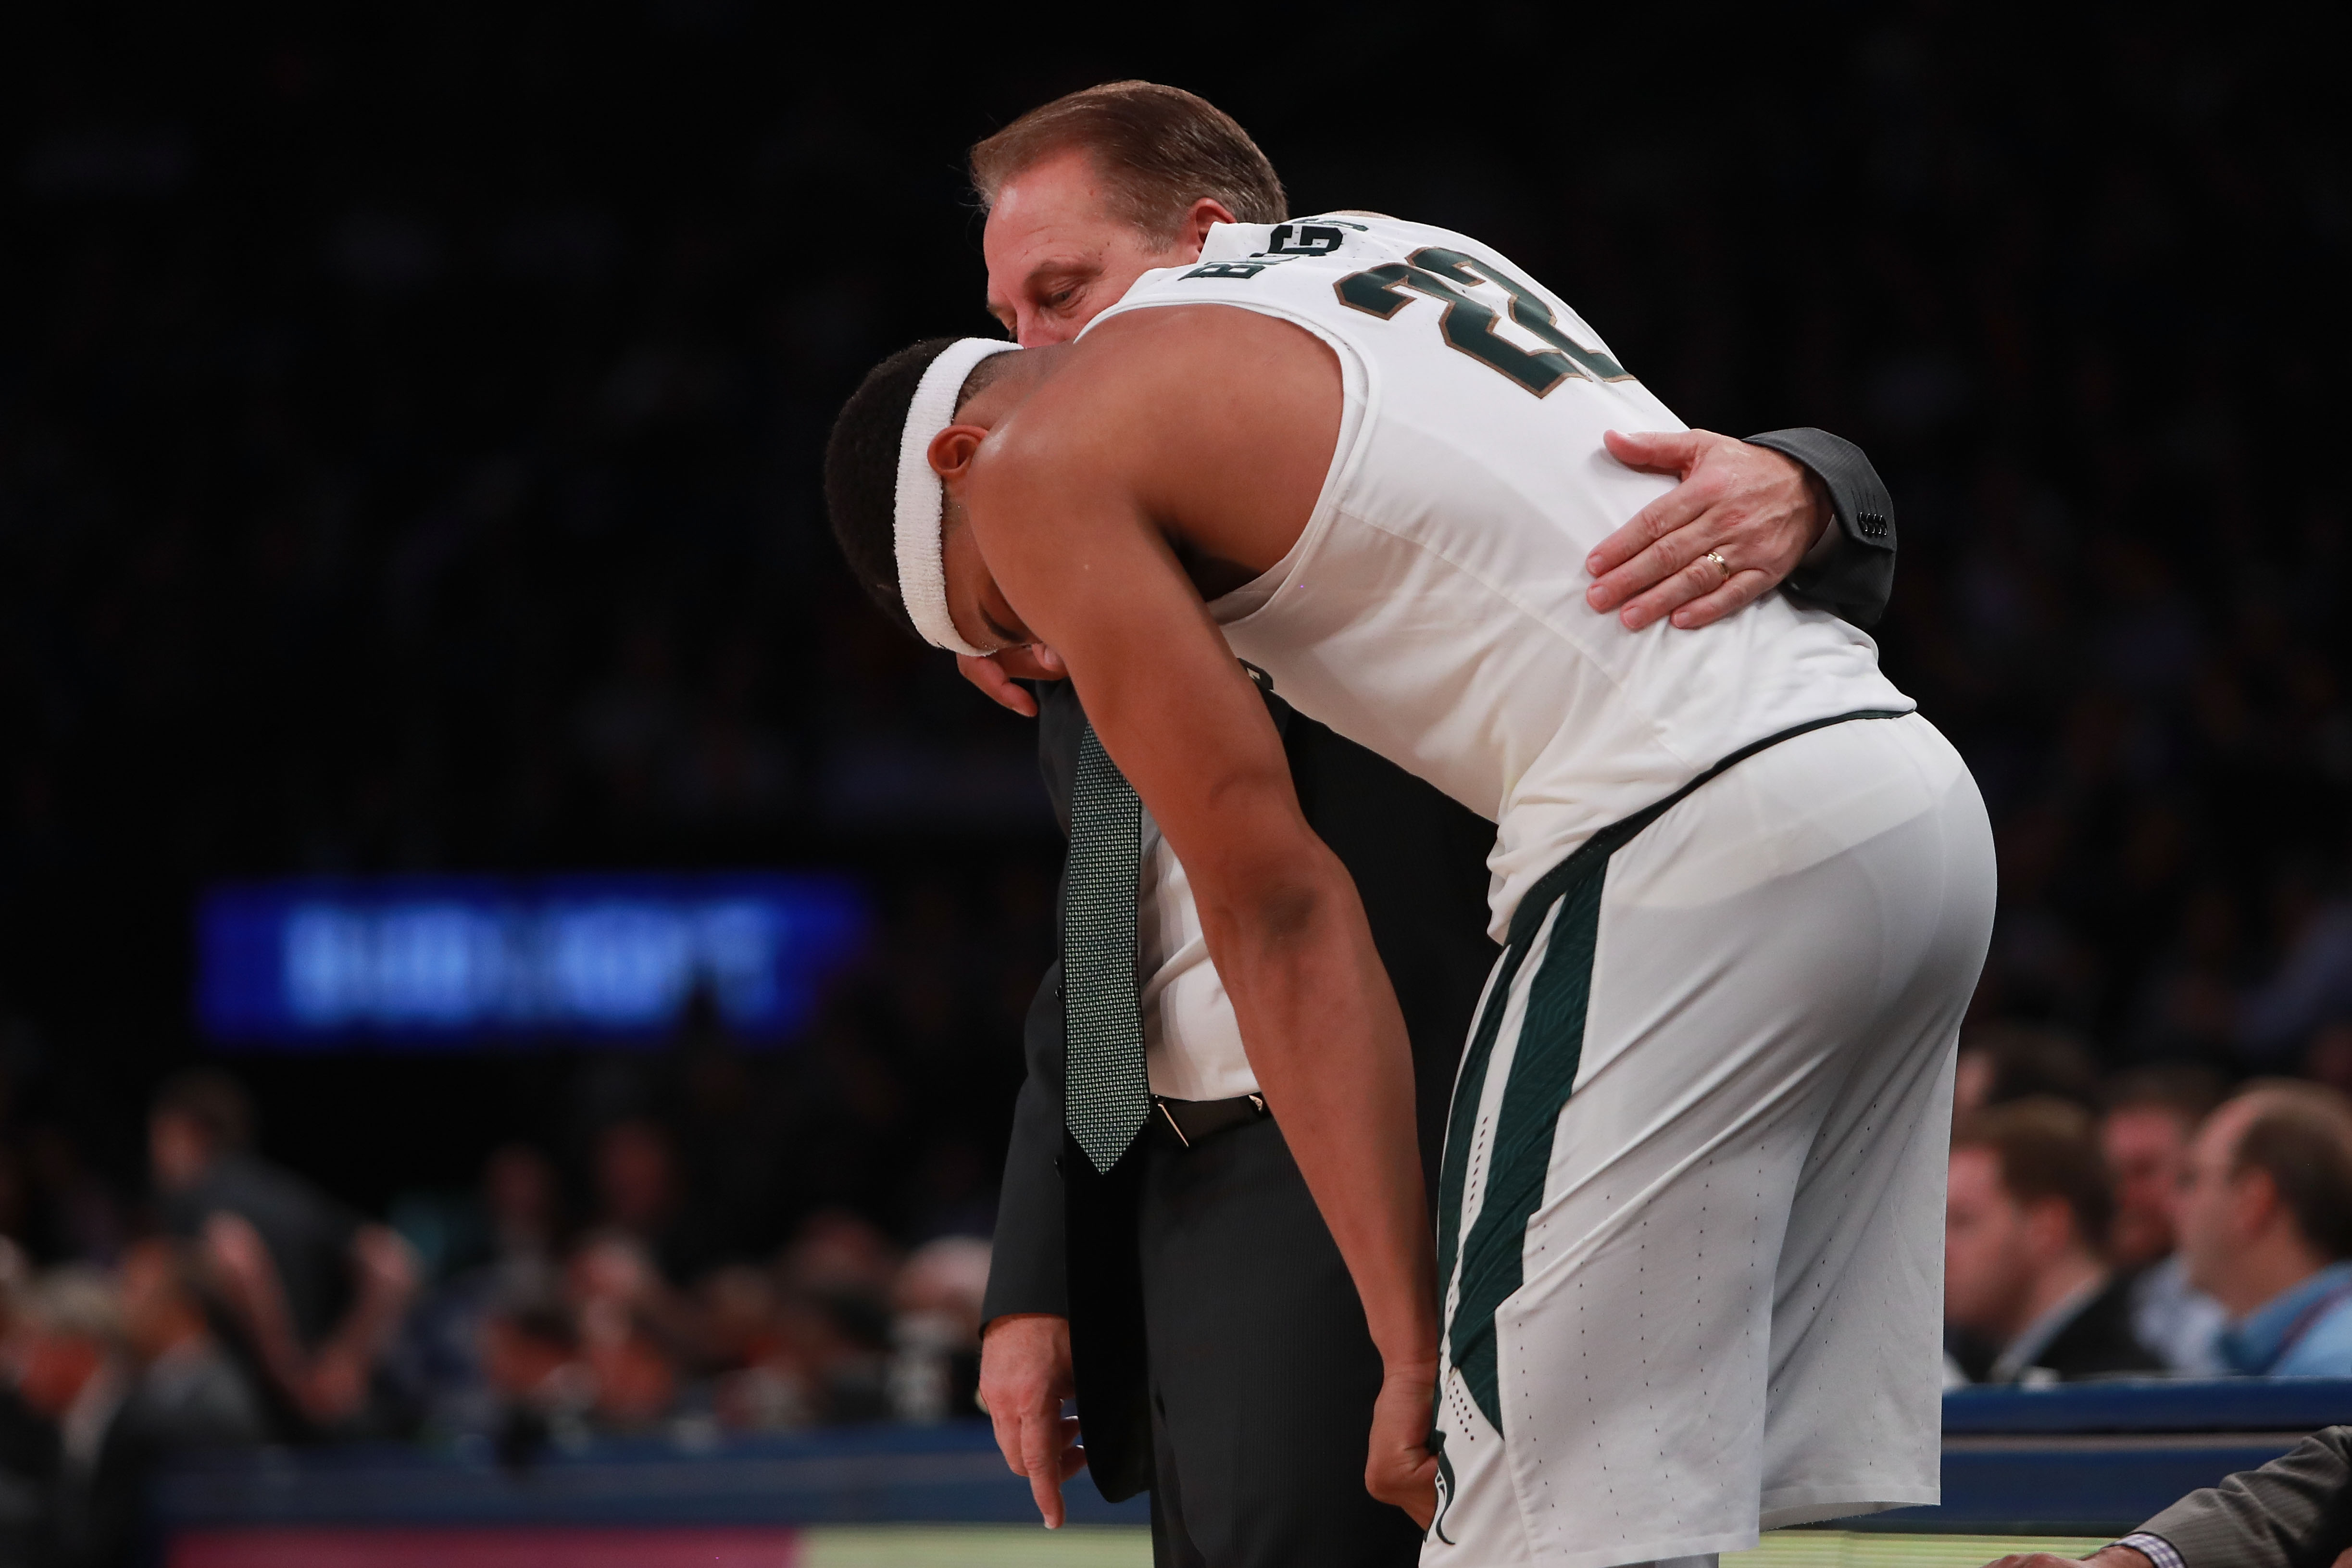 NEW YORK, NY - NOVEMBER 15: Miles Bridges #22 reacts after being taken out of the game by head coach Tom Izzo of the Michigan State Spartans against the Kentucky Wildcats in the second half during the State Farm Champions Classic at Madison Square Garden on November 15, 2016 in New York City. (Photo by Michael Reaves/Getty Images)